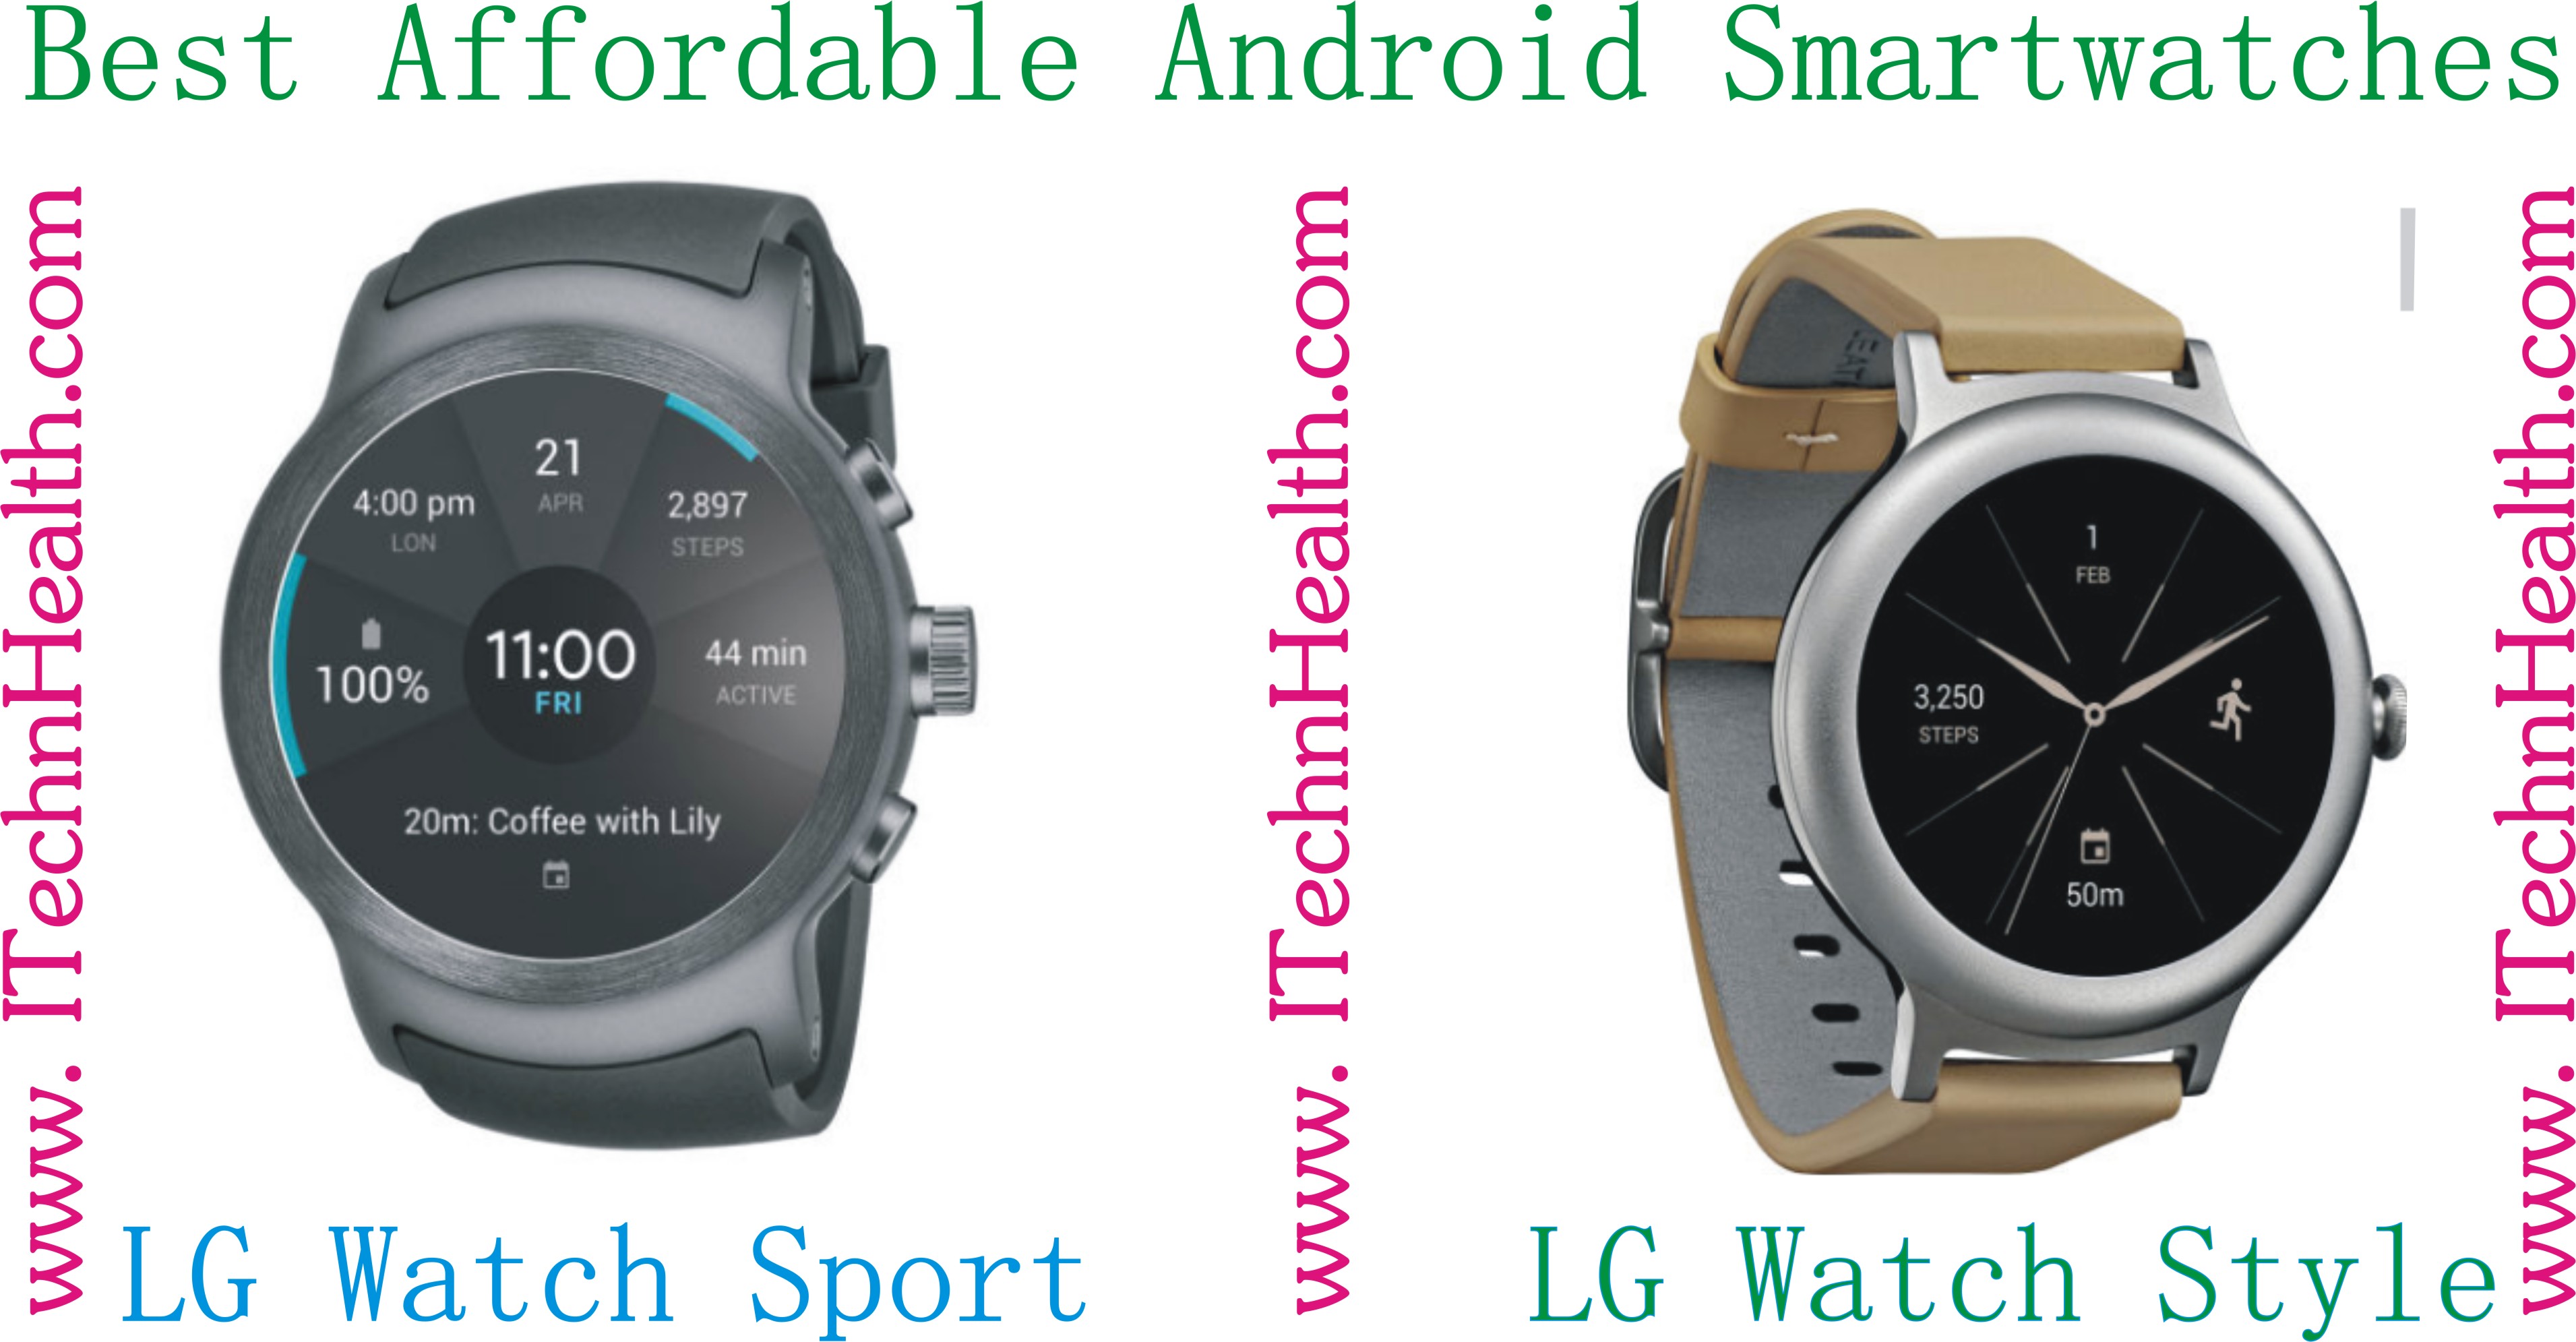 Best Affordable Android Smart Watches, Prices, Specification - iTechnHealth.com